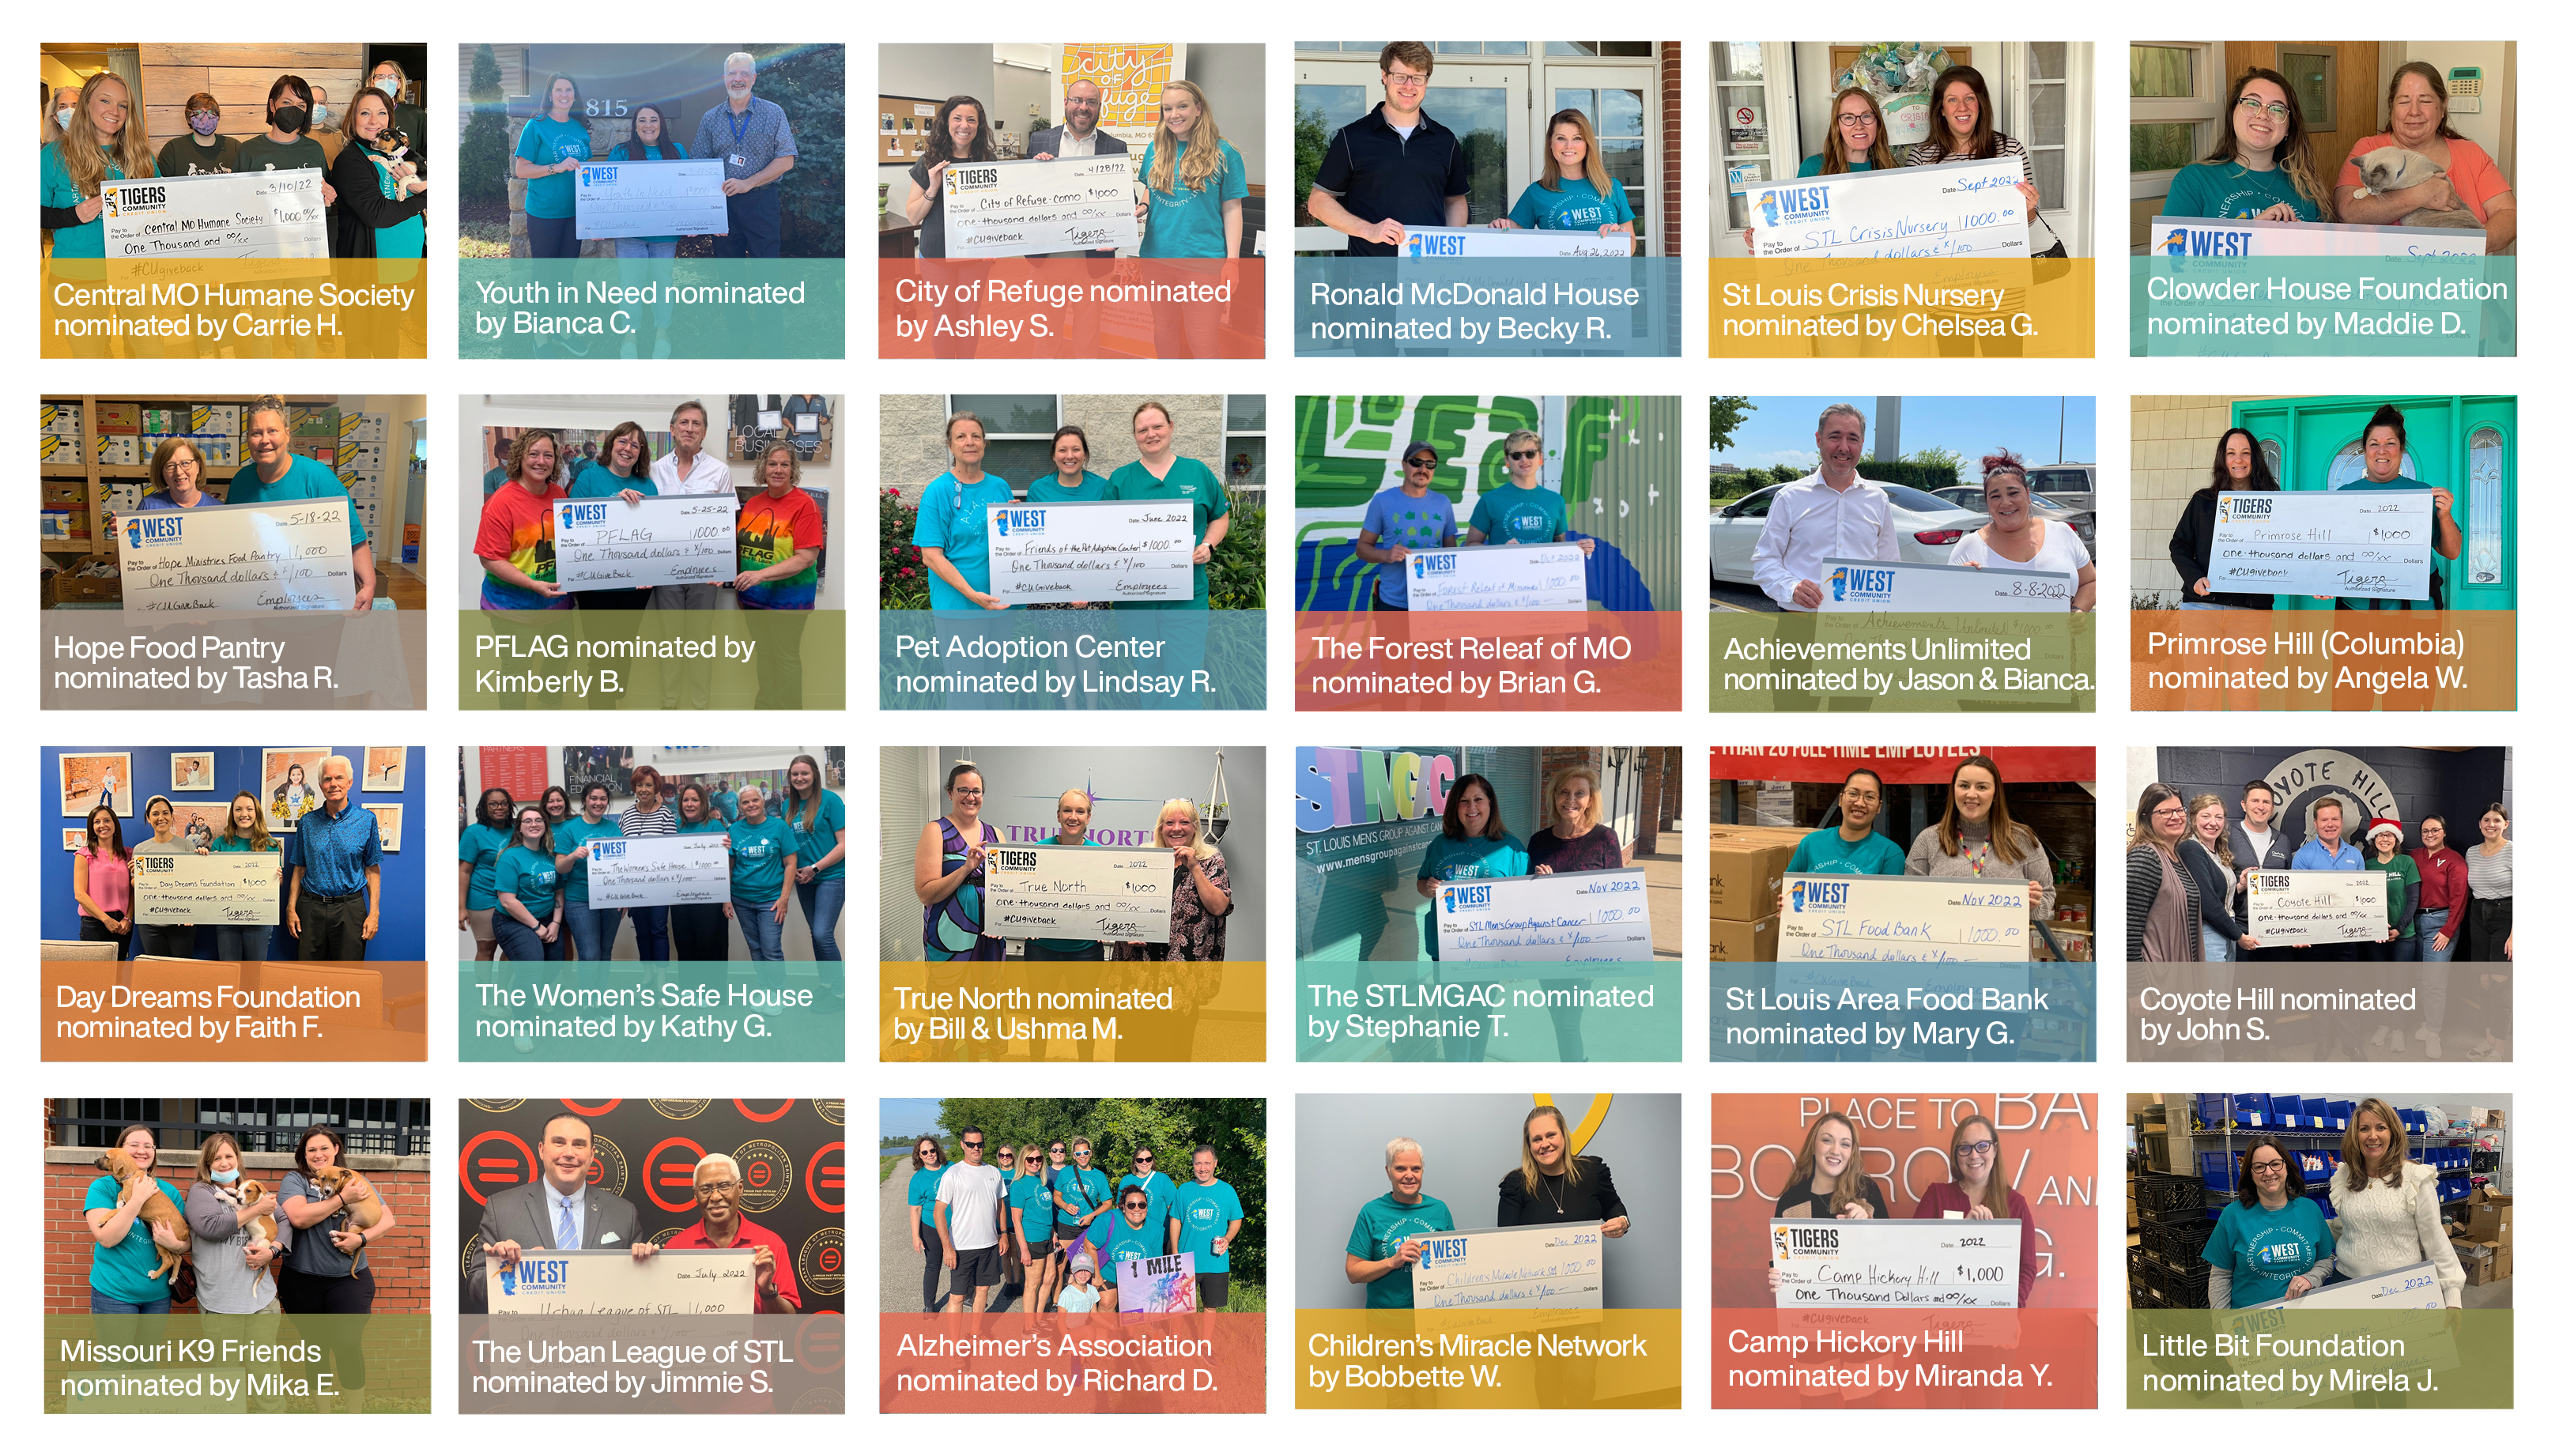 Recap of the Great Employee Philanthropy takeover nominations and recipients.